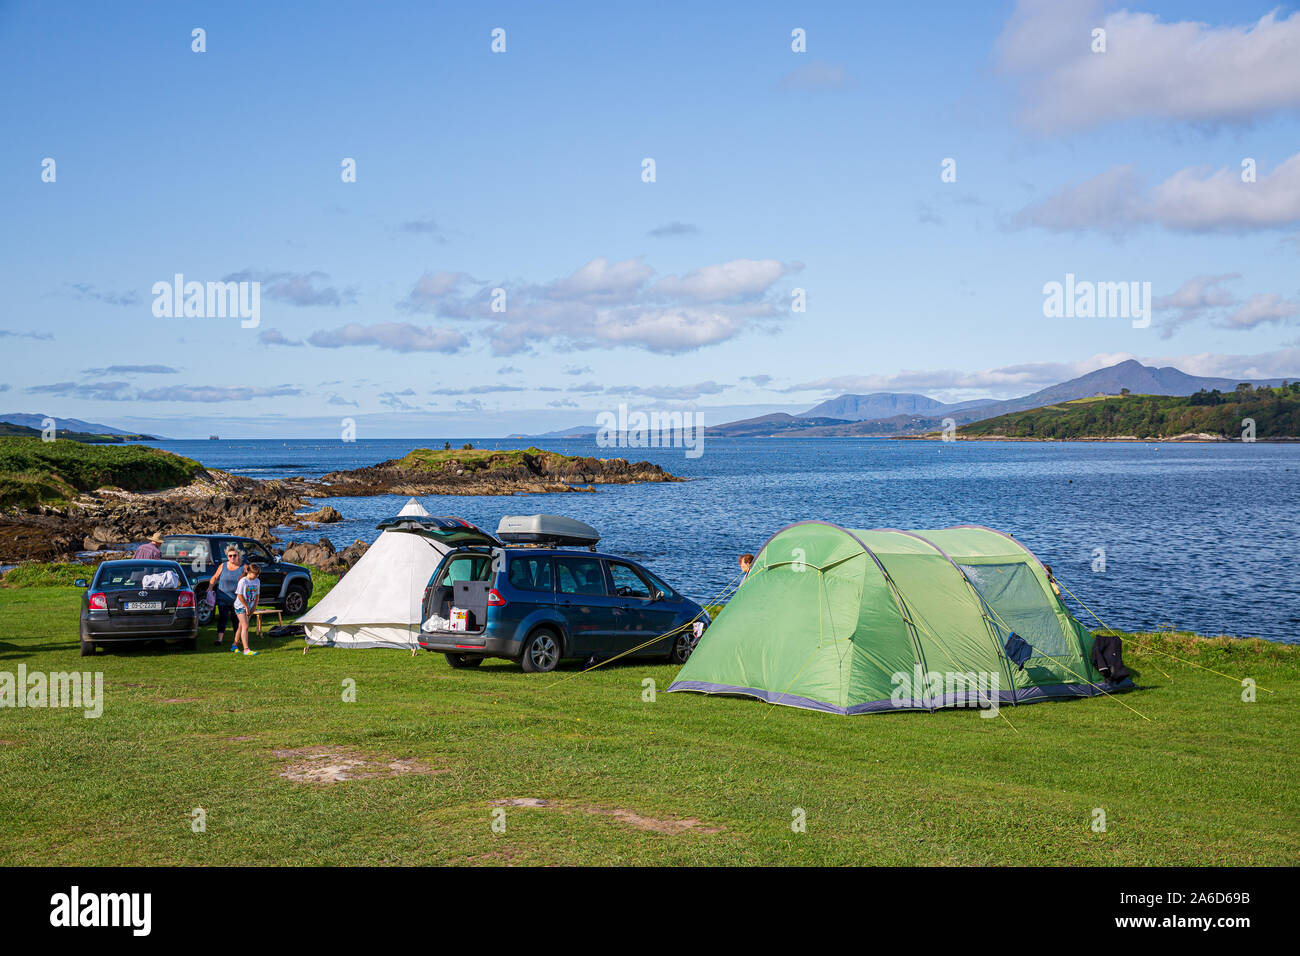 Family camping holidays at the Eagle Point Camping site near Bantry , West Cork, Ireland. Tents are being set up at the banks of Bantry Bay. Stock Photo